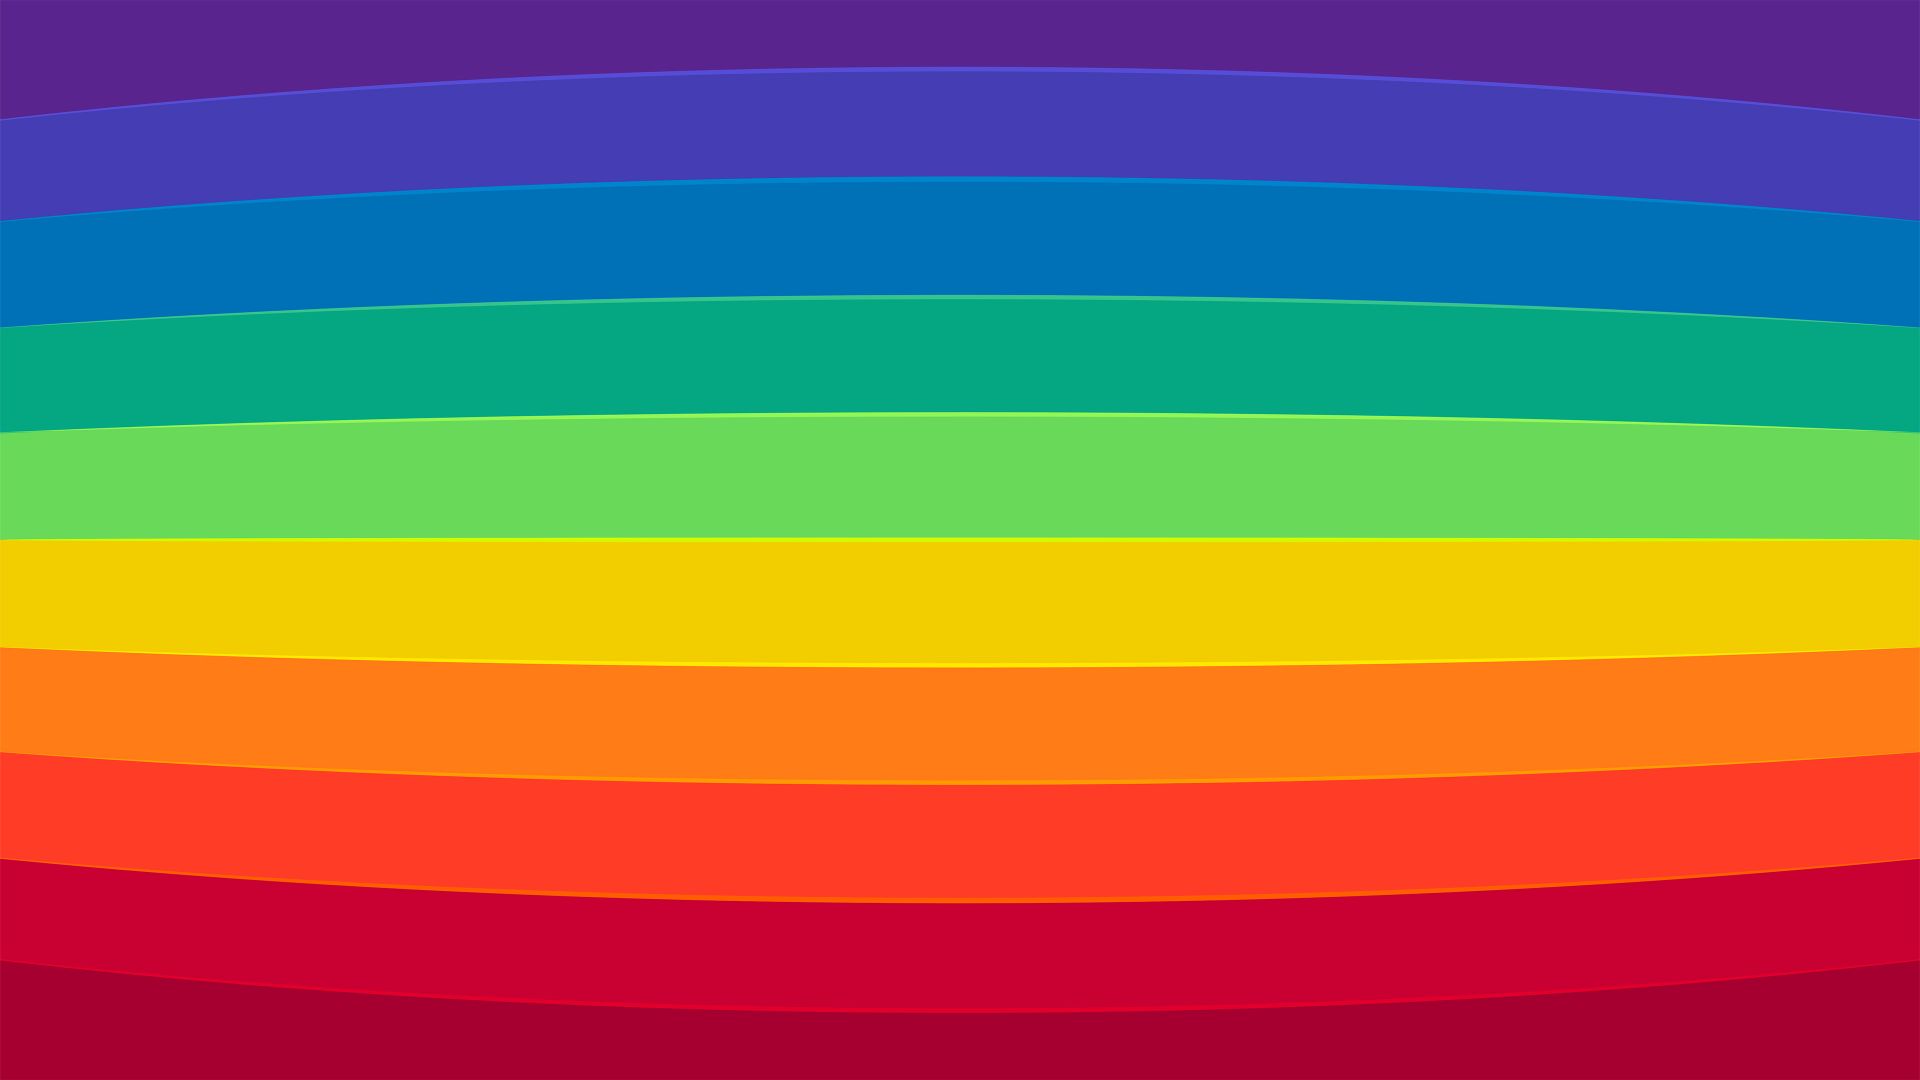 Rainbow colors, stripes, lines wallpaper, HD image, picture, background, 99b3f5